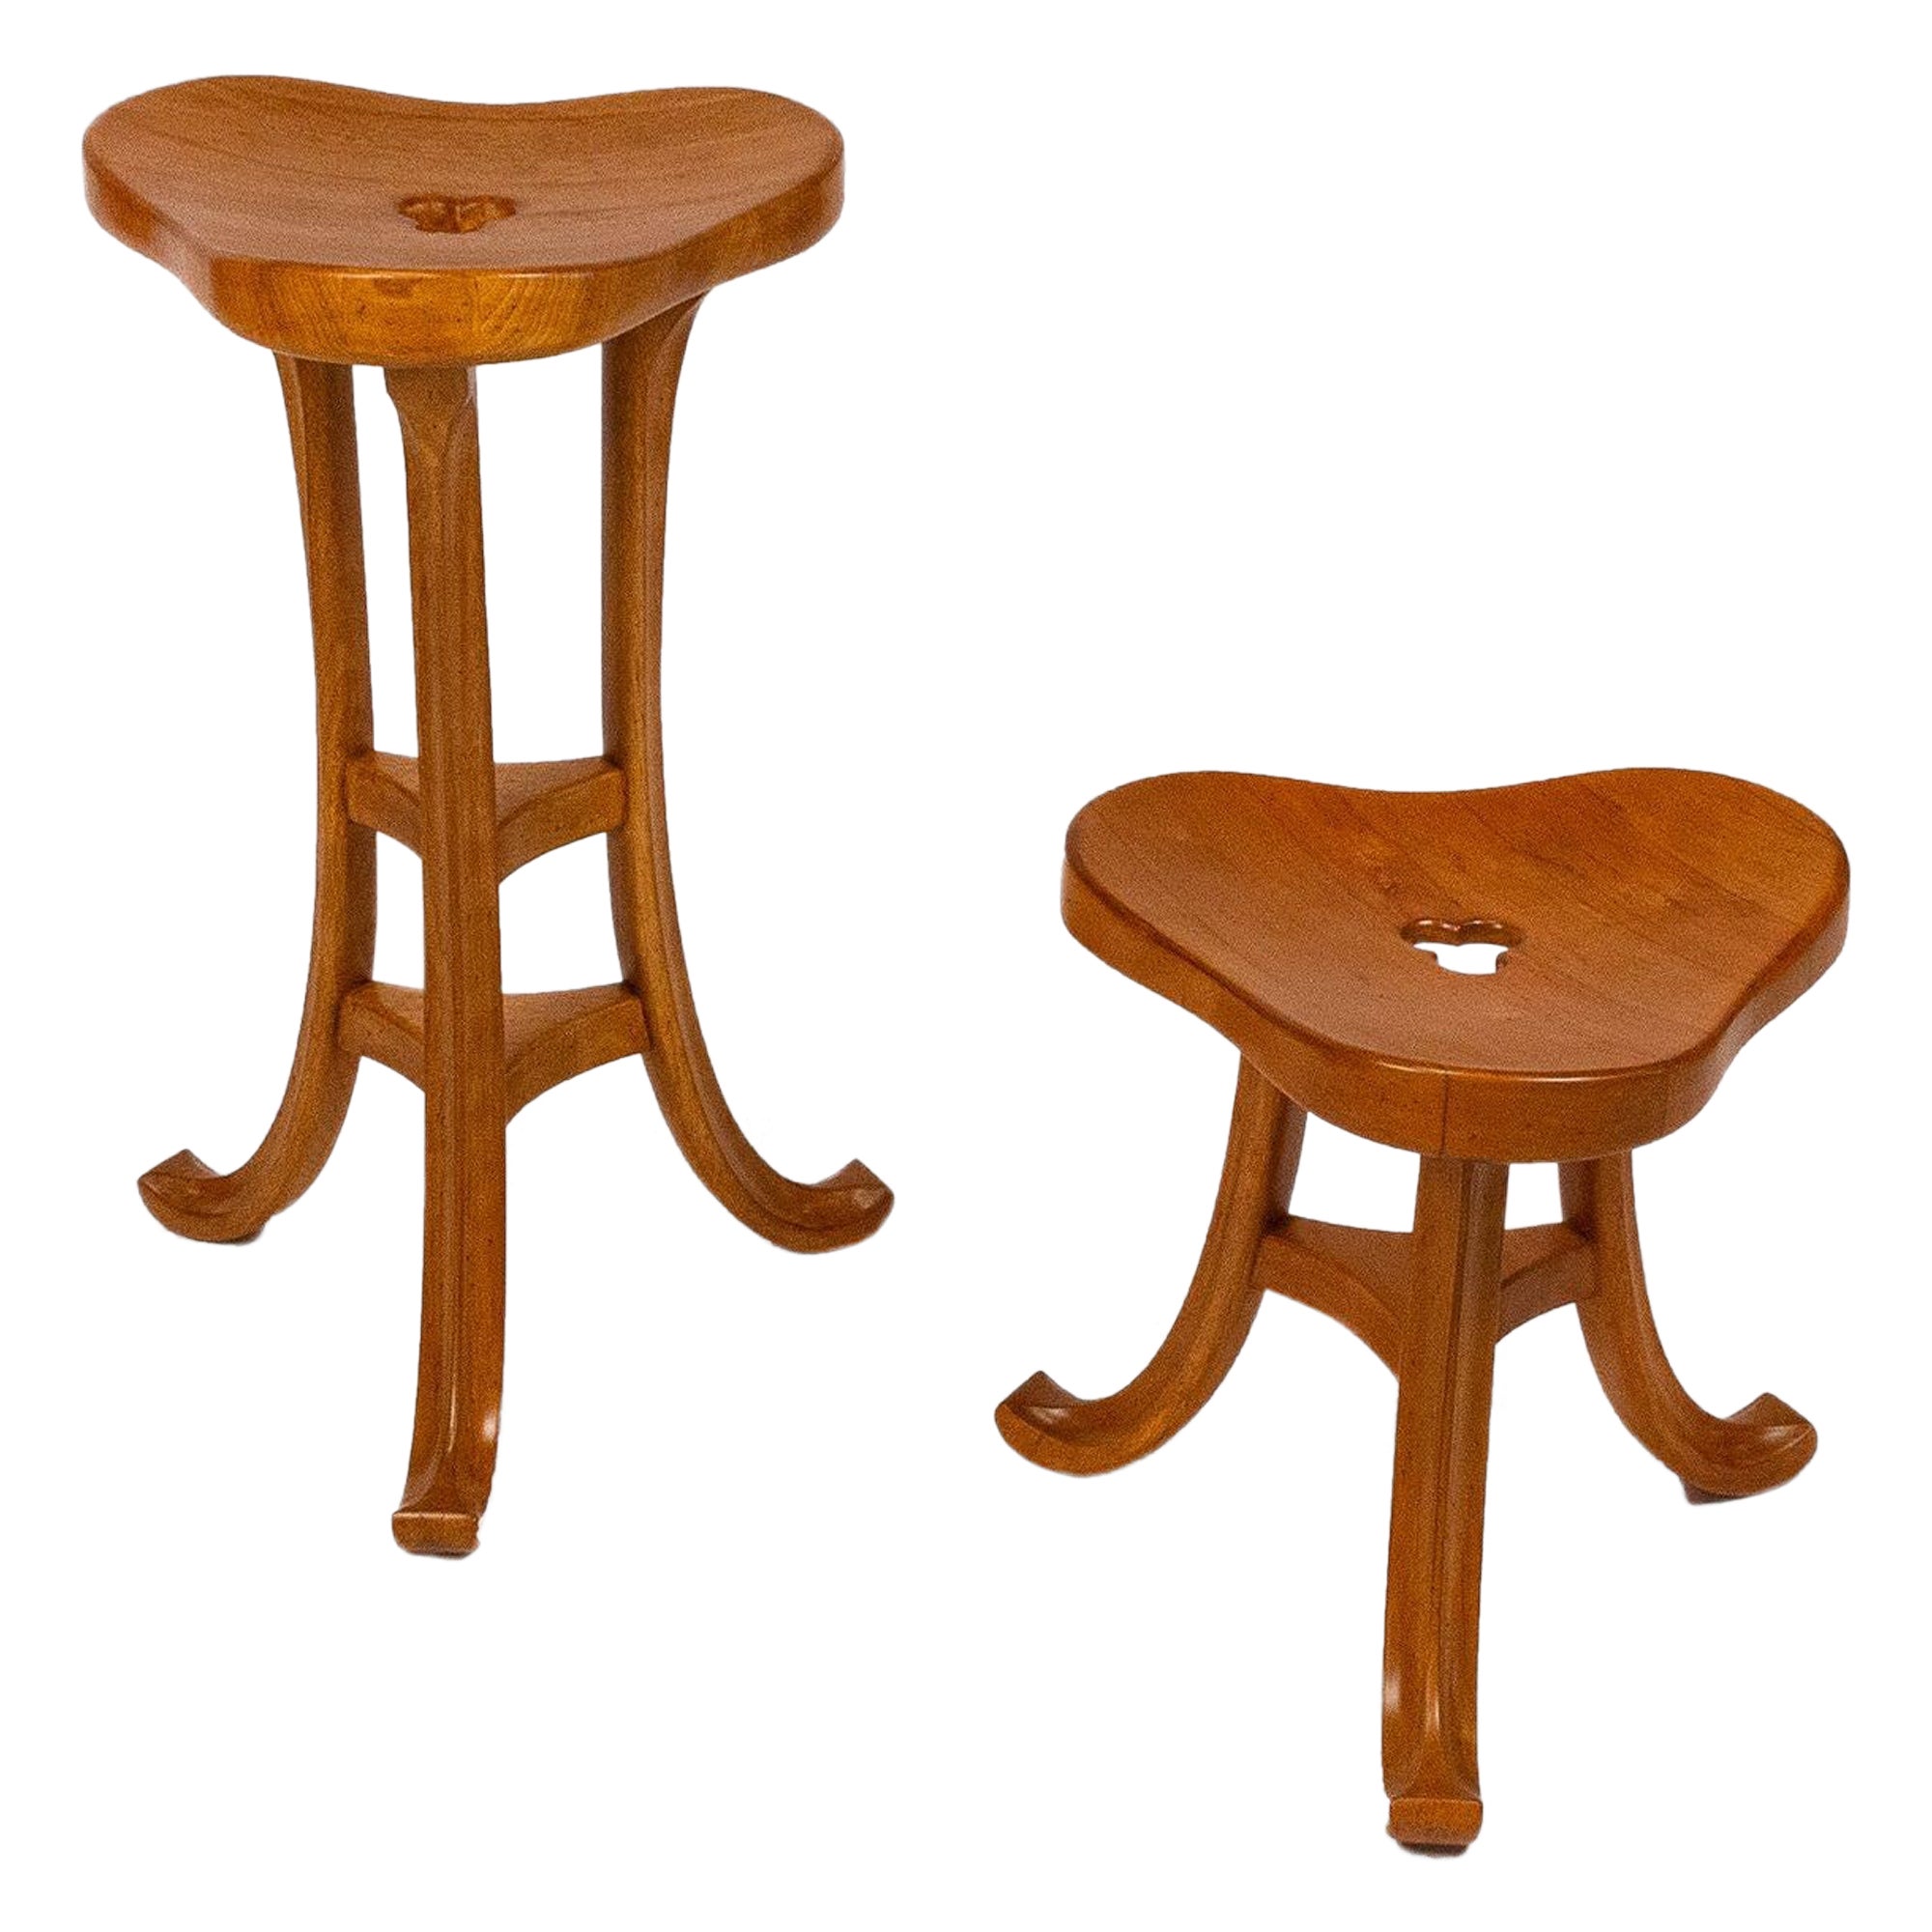 Pair of Three Legged Trefoil Design Stools in the Style of Adolf Loos